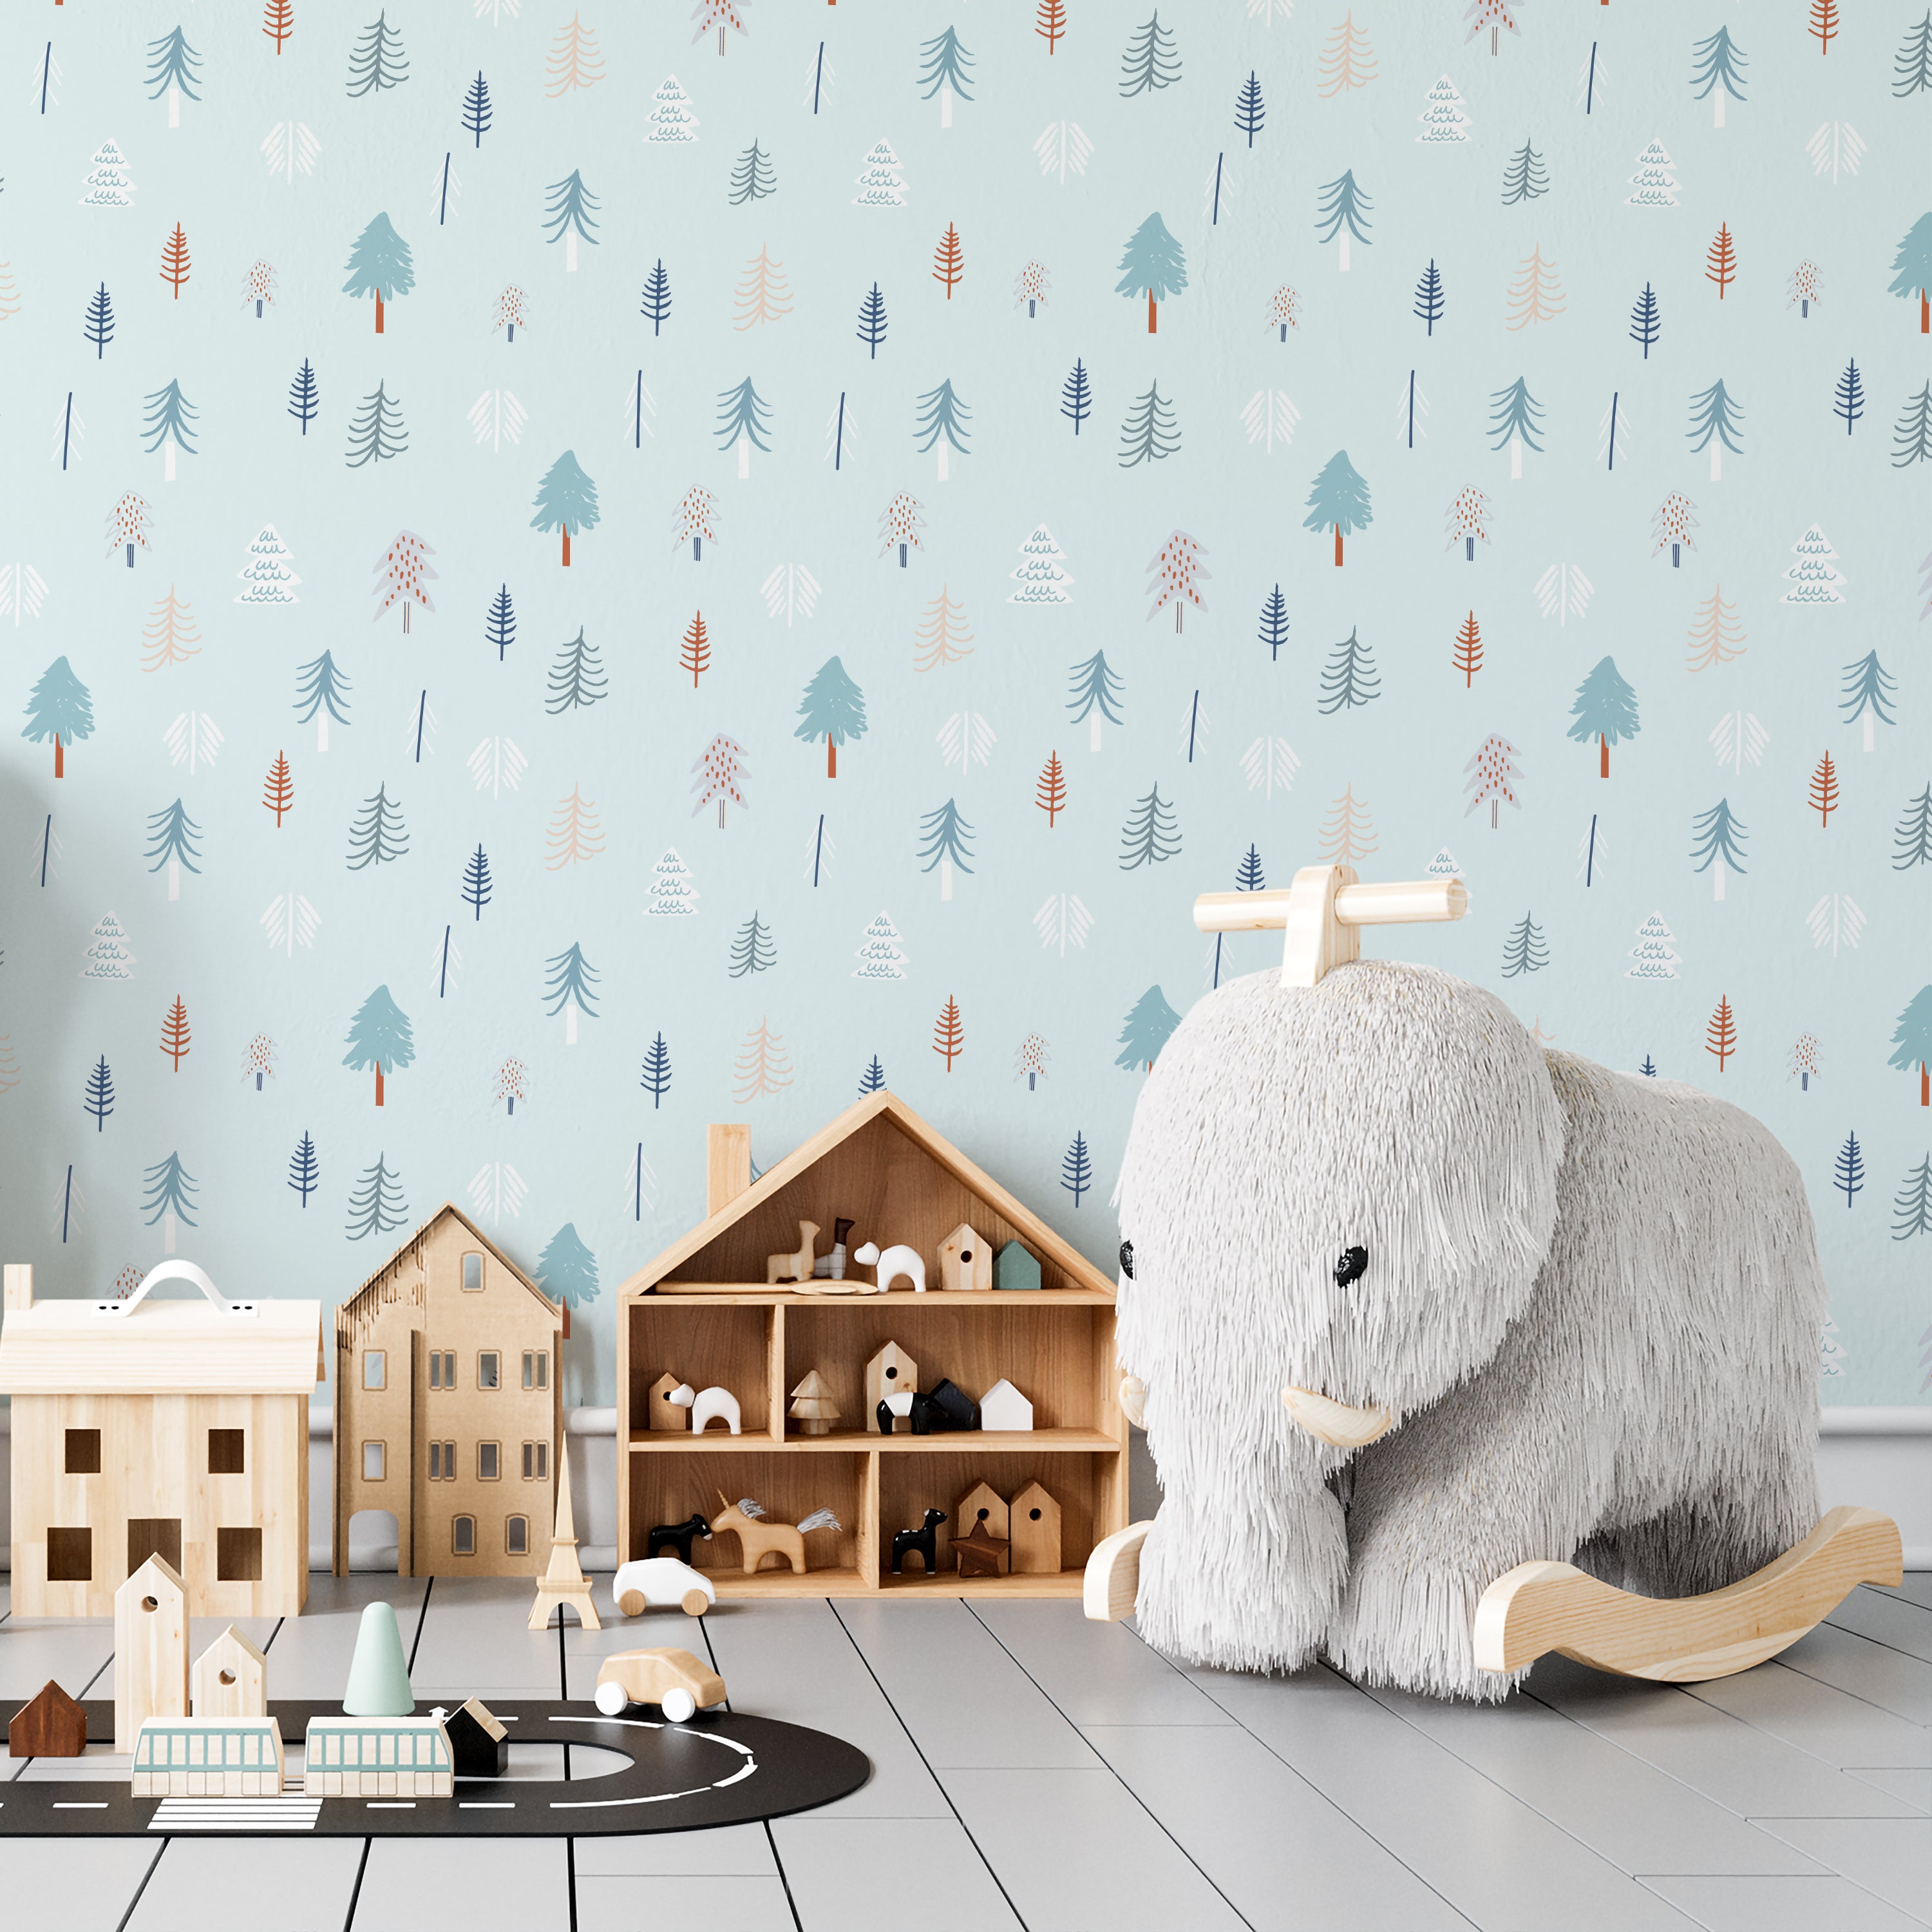 A child’s playroom featuring walls adorned with the "Nordic Tree Wallpaper" displaying a soothing array of stylized trees on a light blue background. The room includes wooden toys, a plush polar bear rocker, and a small wooden playhouse, creating a serene and playful environment.